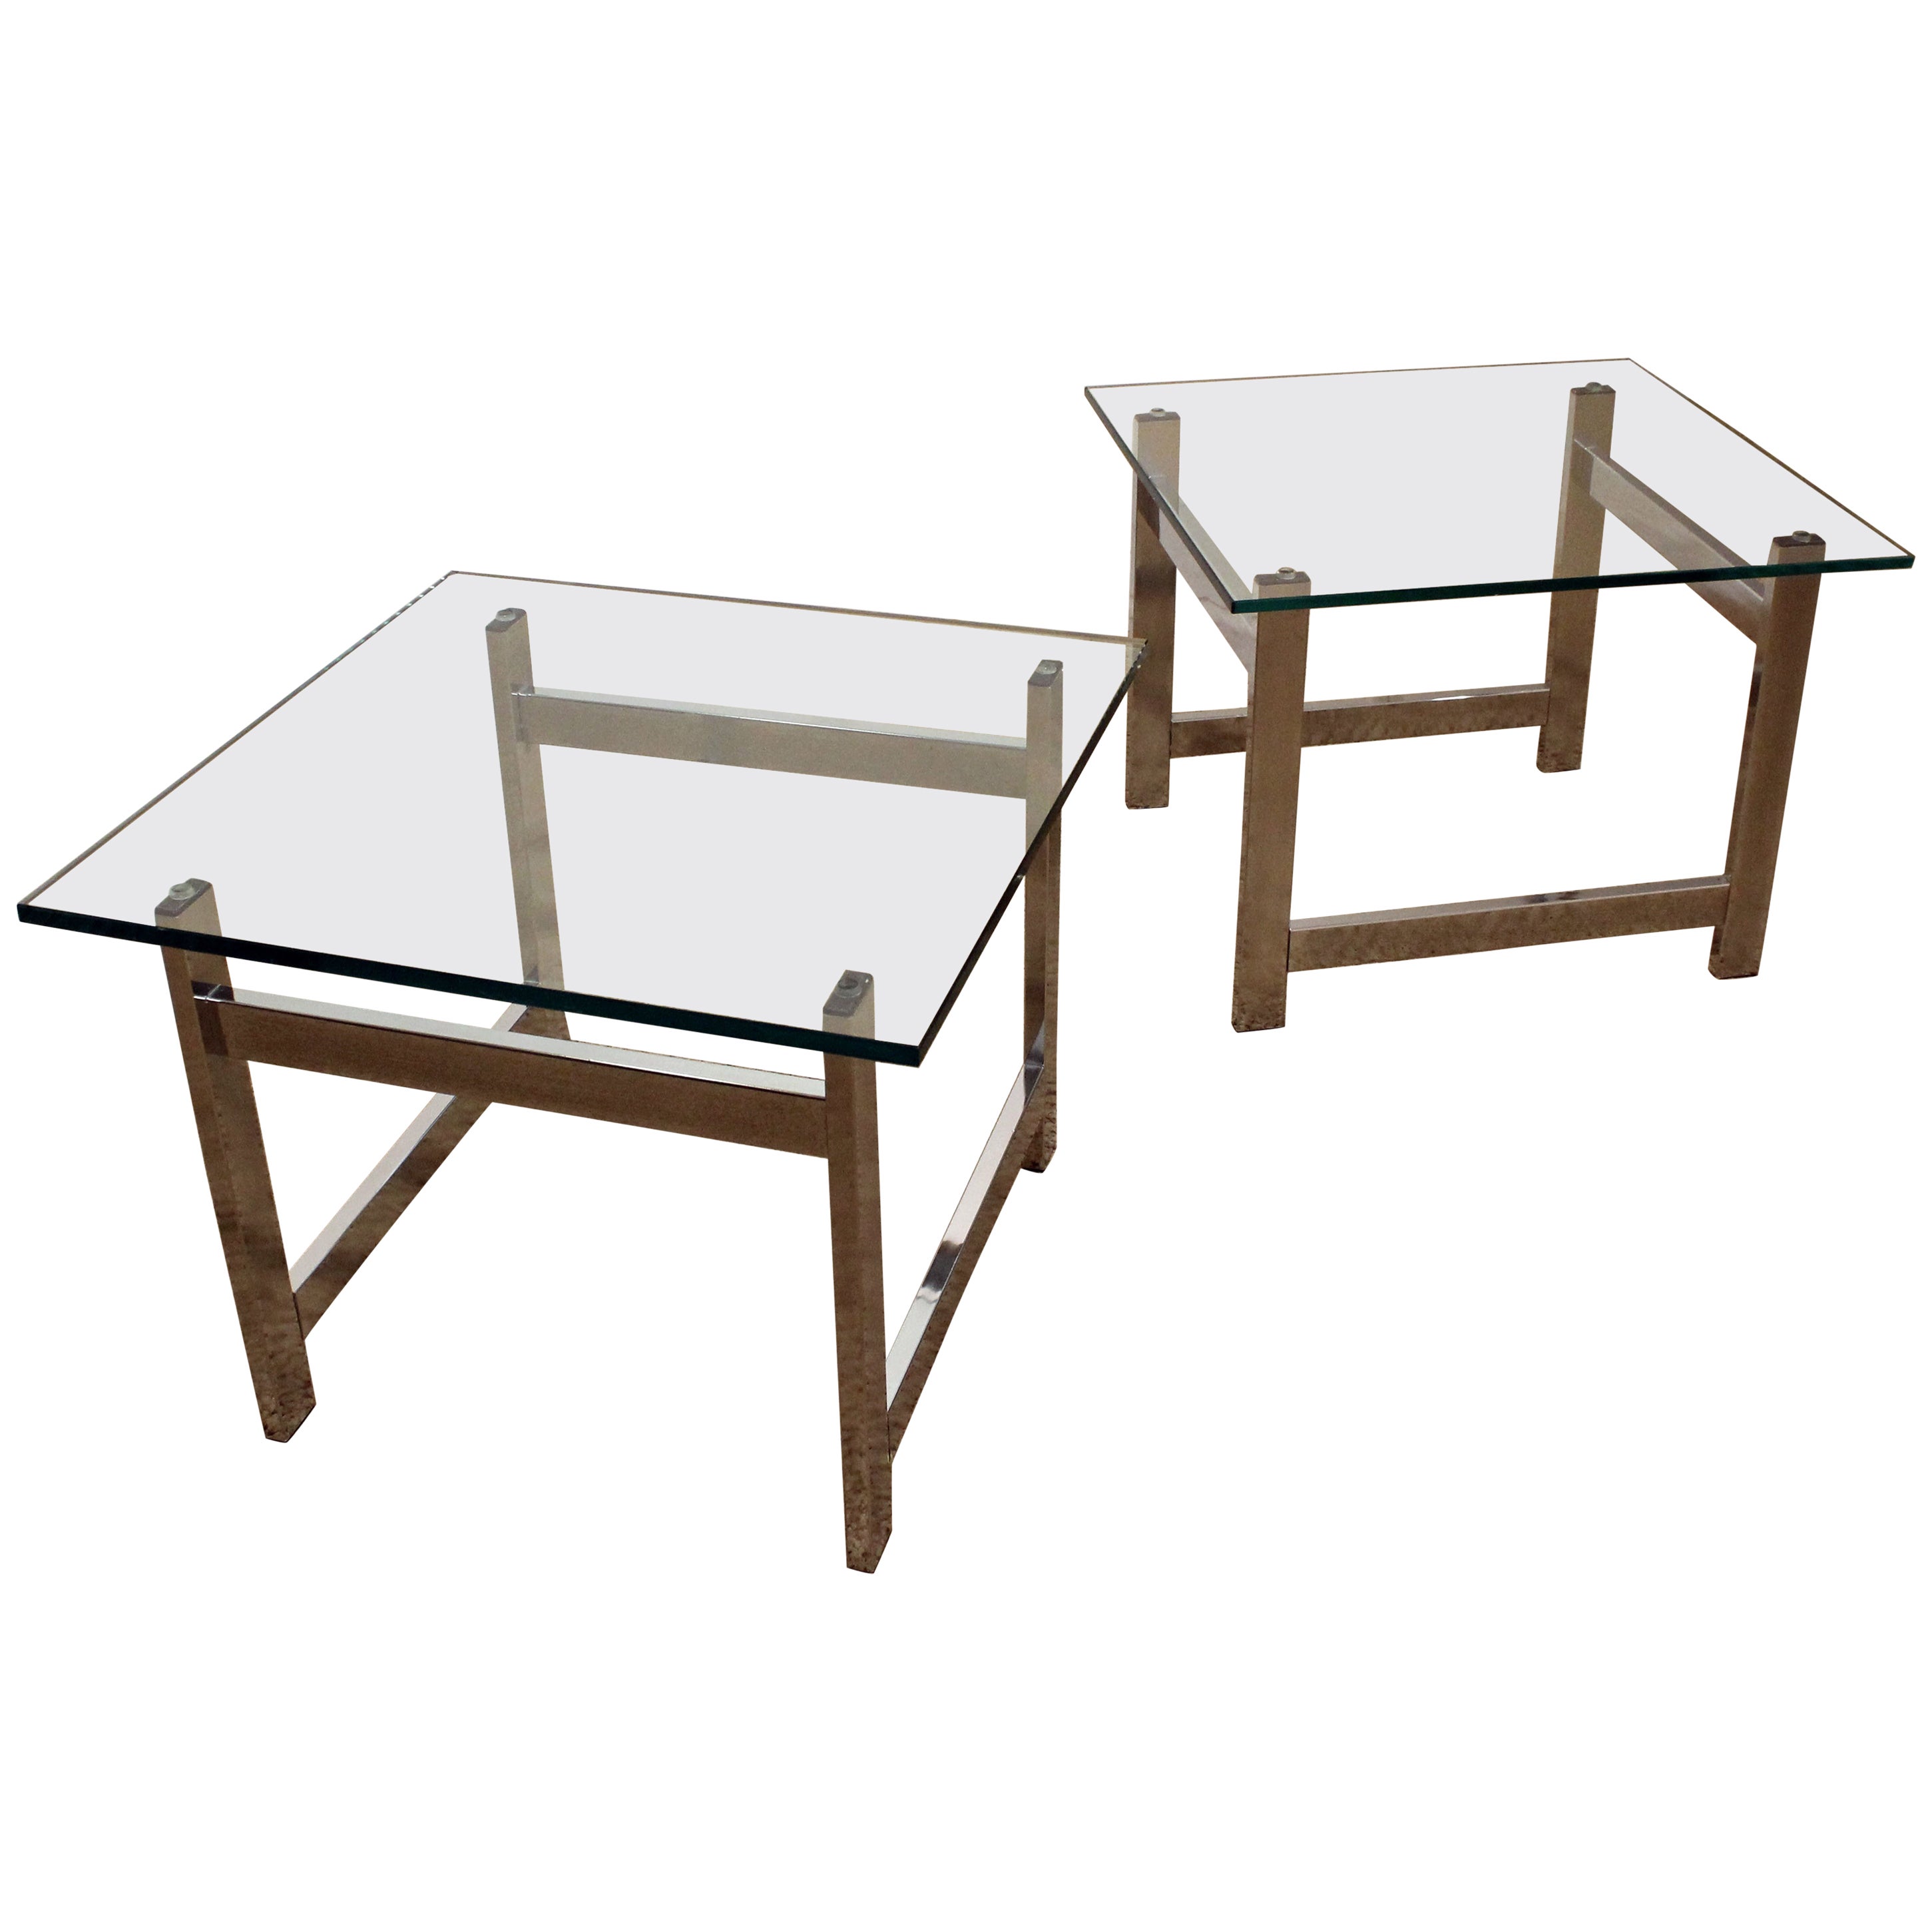 pair mid century modern milo baughman chrome and glass end tables for fold out coffee table big lots ashley signature line distressed lift top small gold lamp fire pit garden set